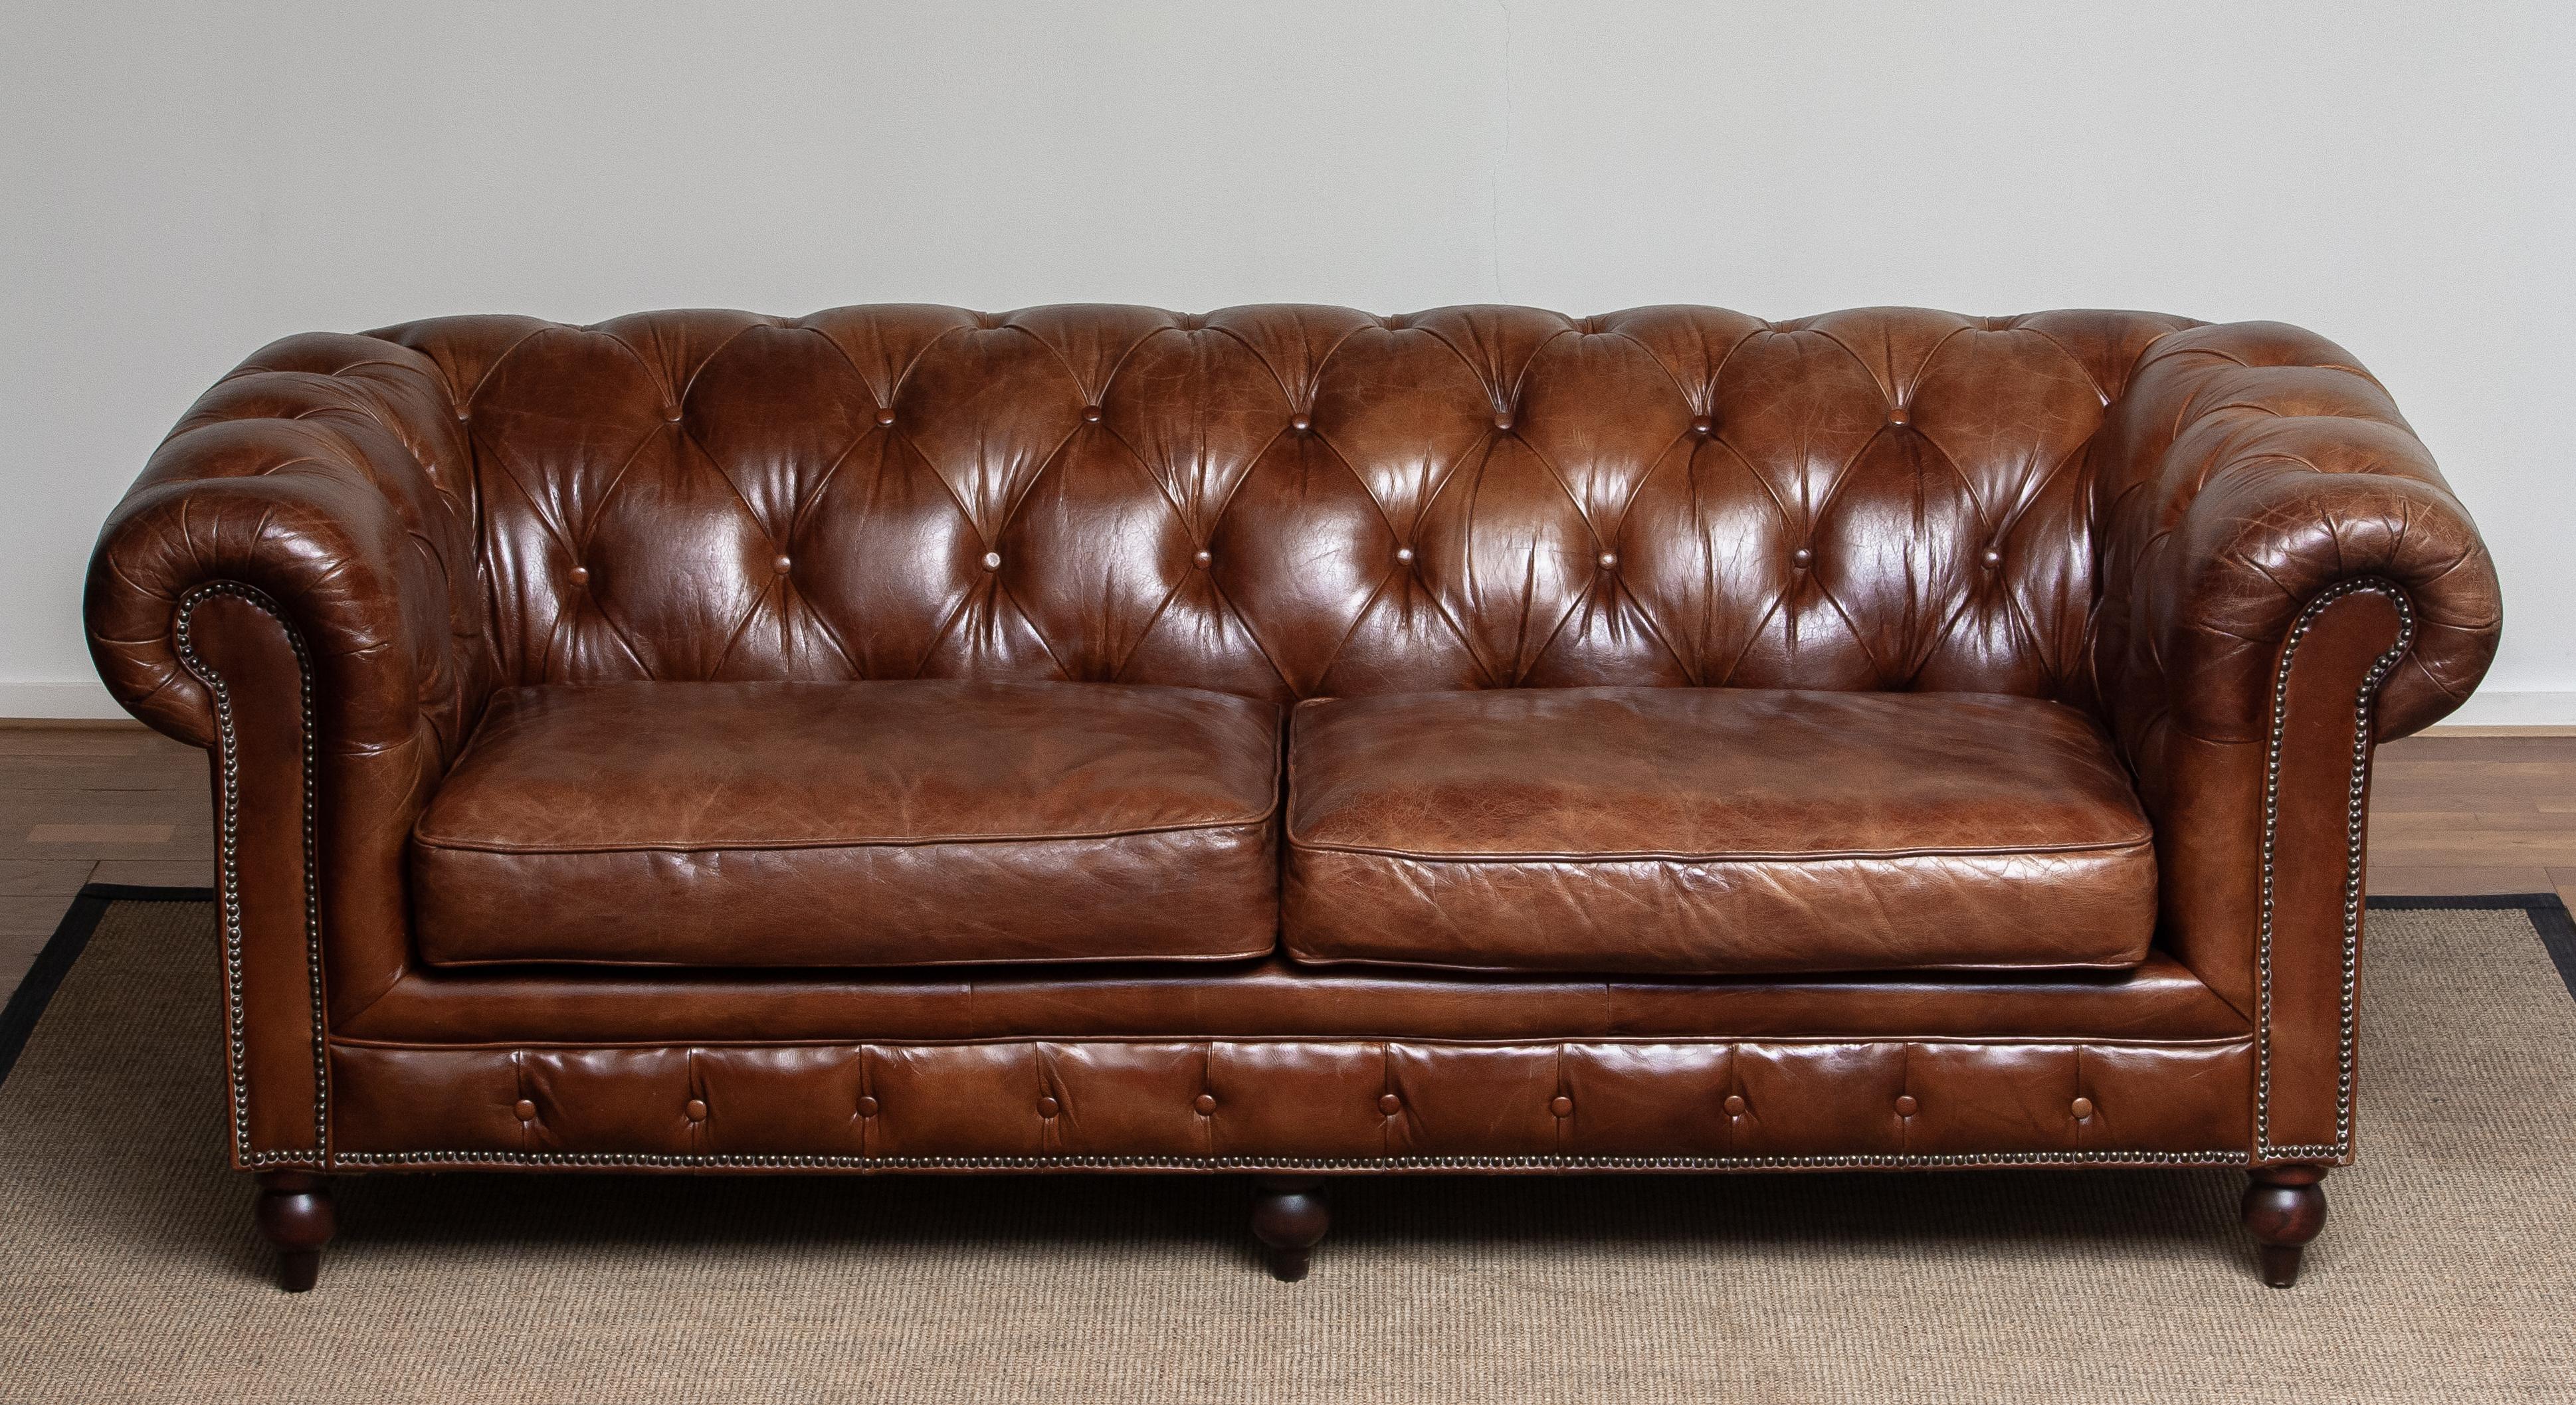 Tufted Brown Leather Chesterfield Sofa and Arm / Lounge Chair 15